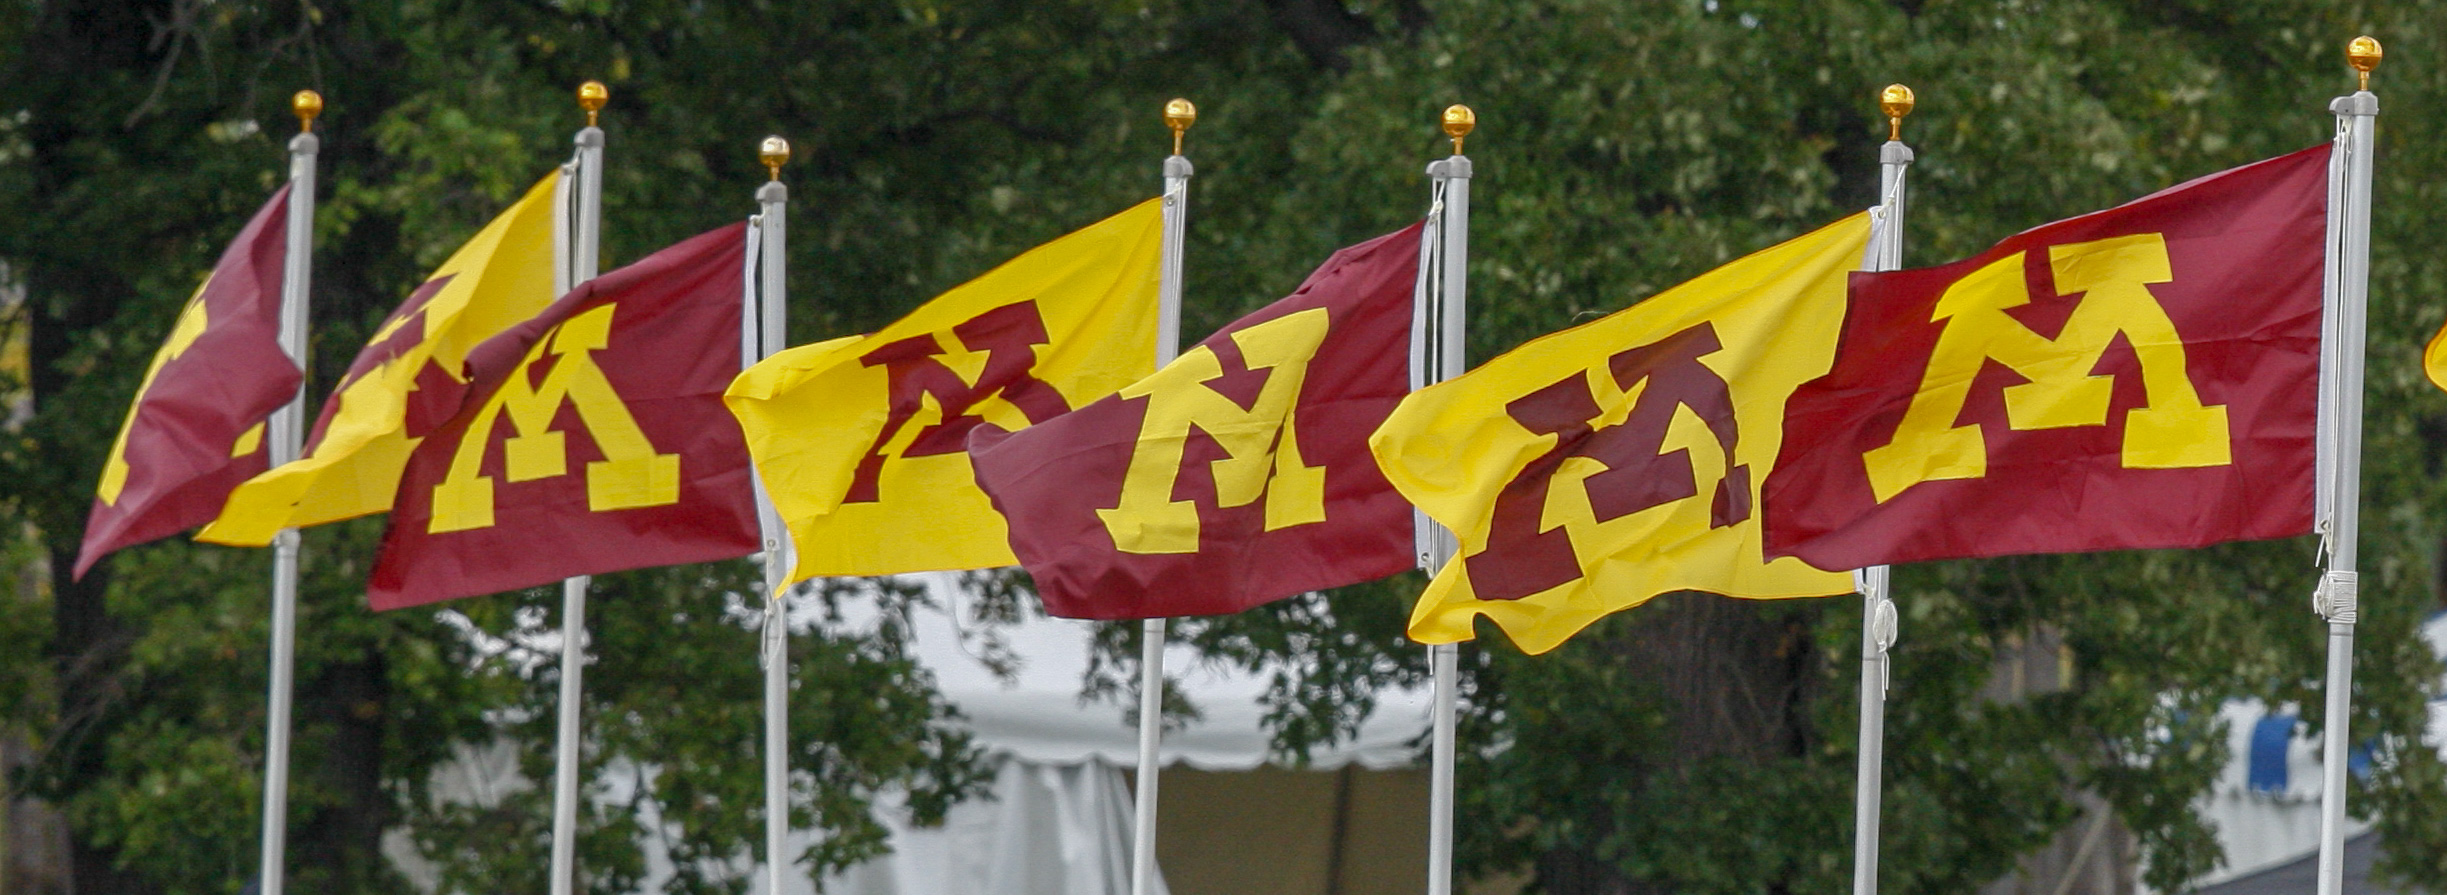 U of M flags blowing in the wind 